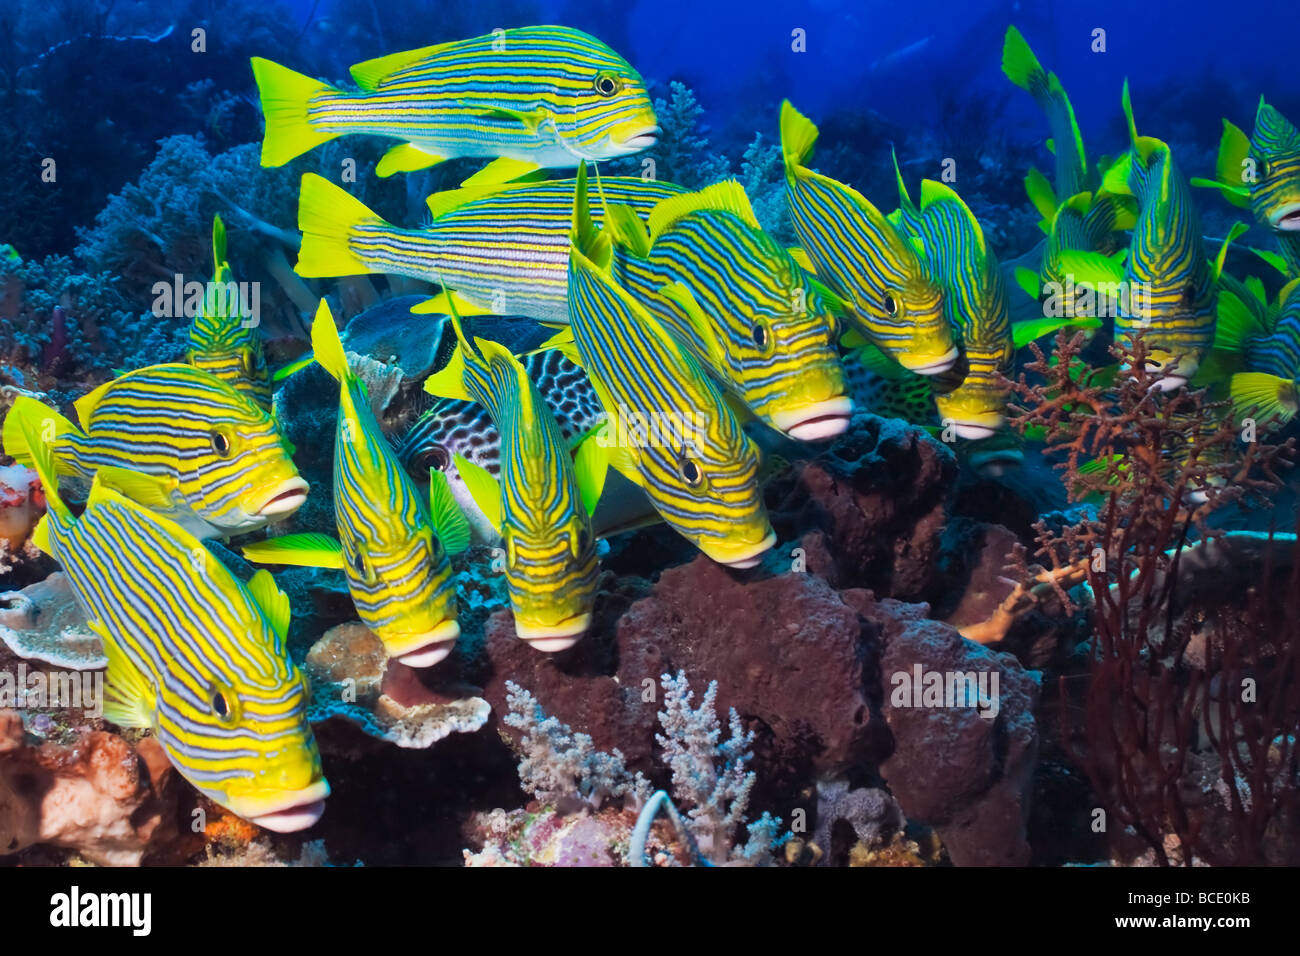 A school of Ribbon Sweetlips hug the coral reef in The Flores Sea near Komodo Island, Indonesia. Stock Photo